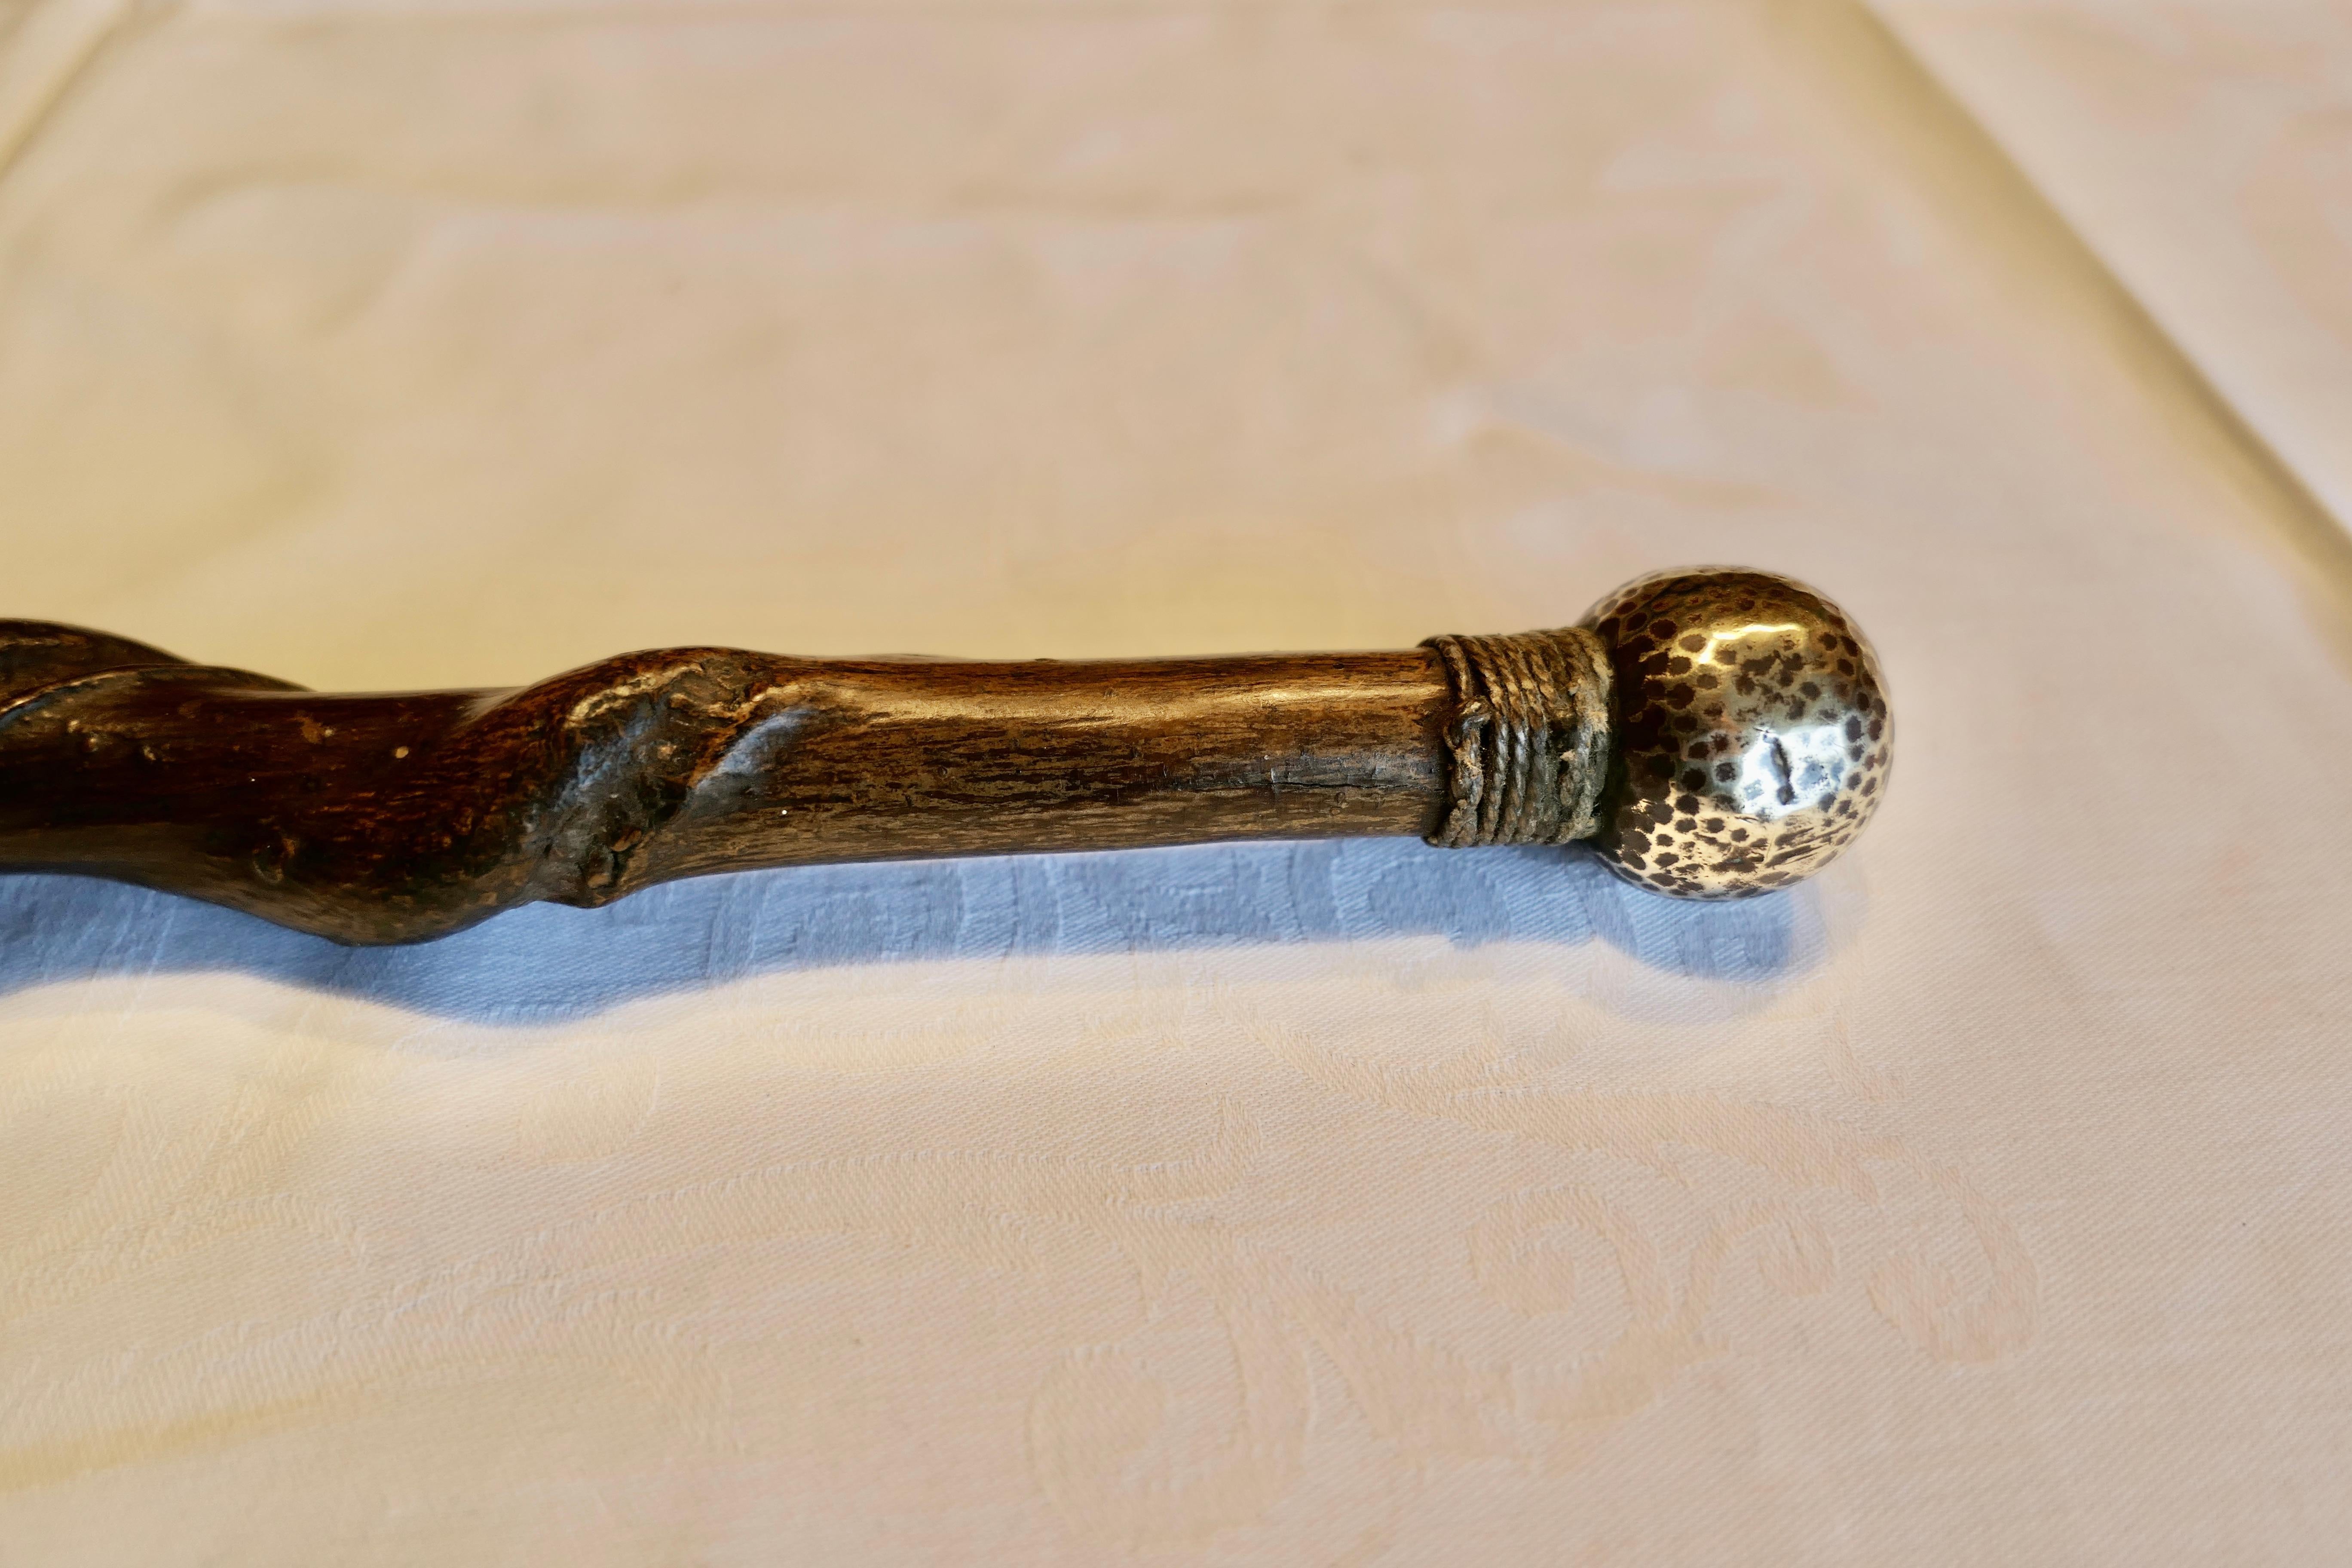 Arts & Crafts twisted walking cane with beaten brass handle

This charming twisted cane is in the Arts and Crafts tradition with beaten brass Knob at the handle which has a rope collar, it is in good antique condition consistent with age.

The